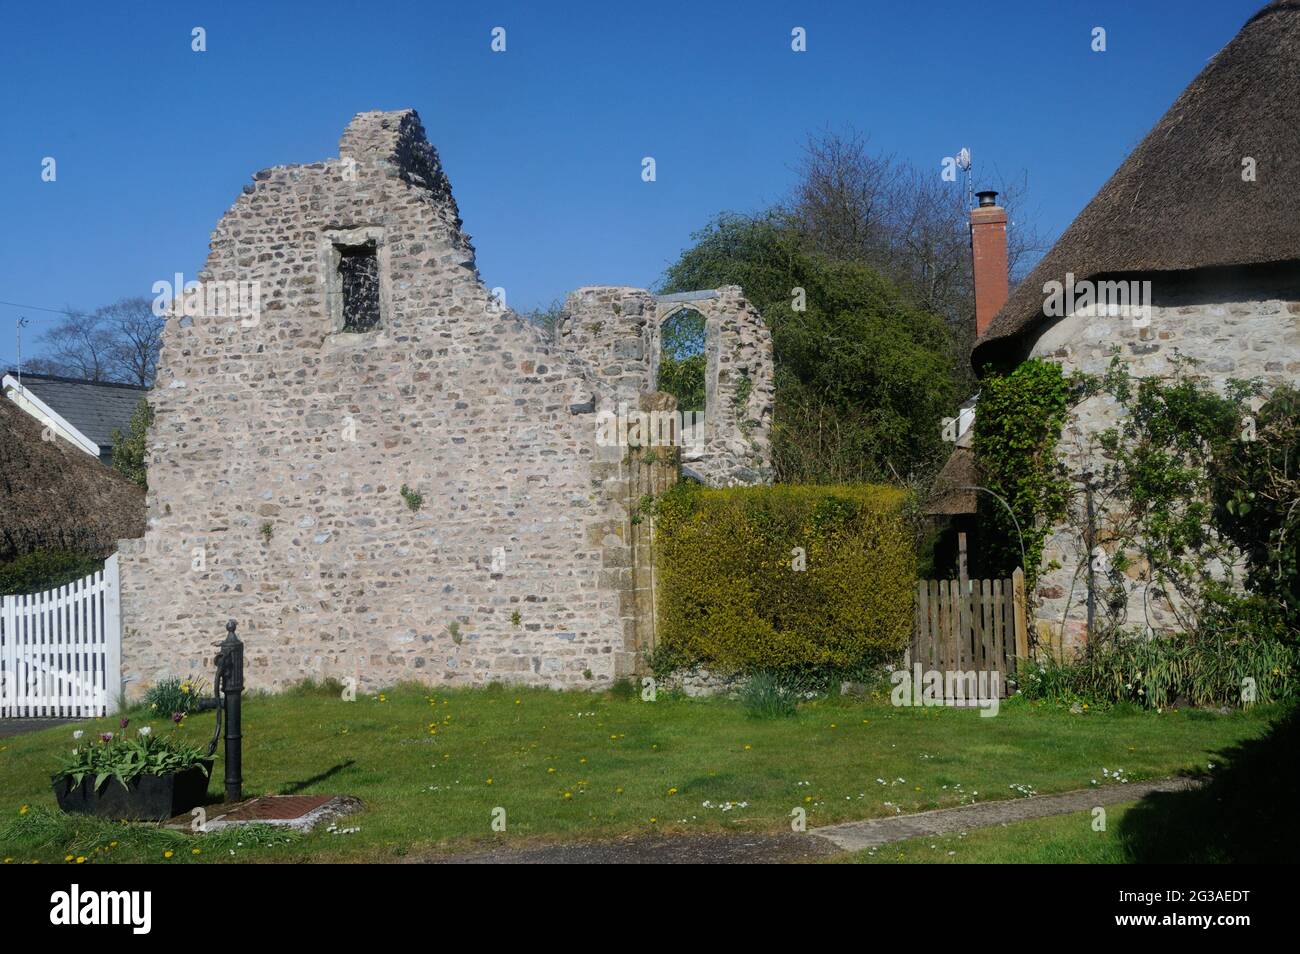 The ruins of the gatehouse of Dunkeswell Abbey, near Dunkeswell, Devon, England Stock Photo